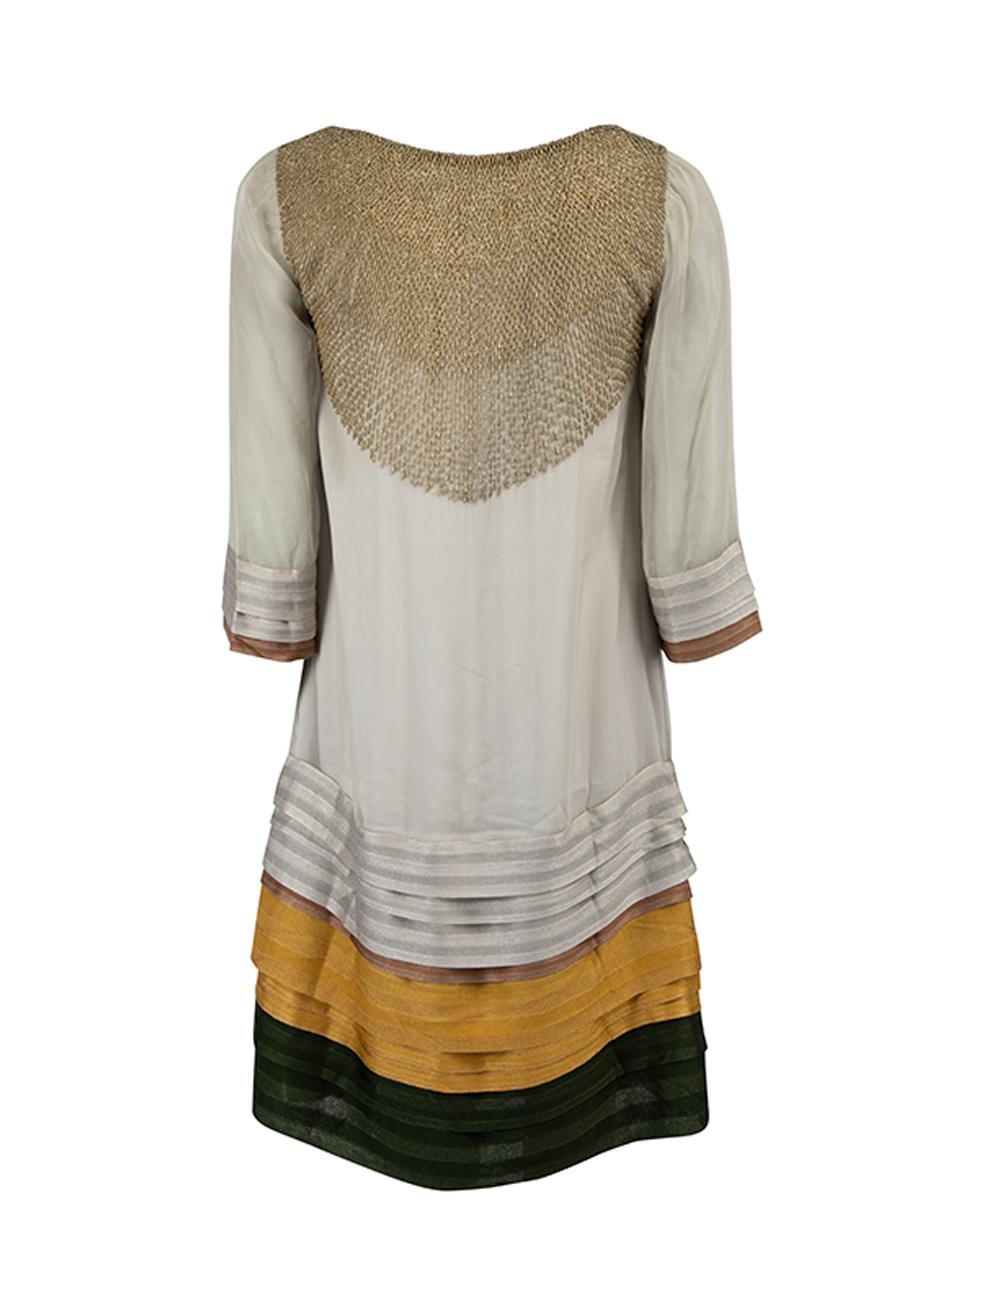 Pre-Loved Missoni Women's Multicolour Dress with Gold Bead Embellishments In Excellent Condition For Sale In London, GB